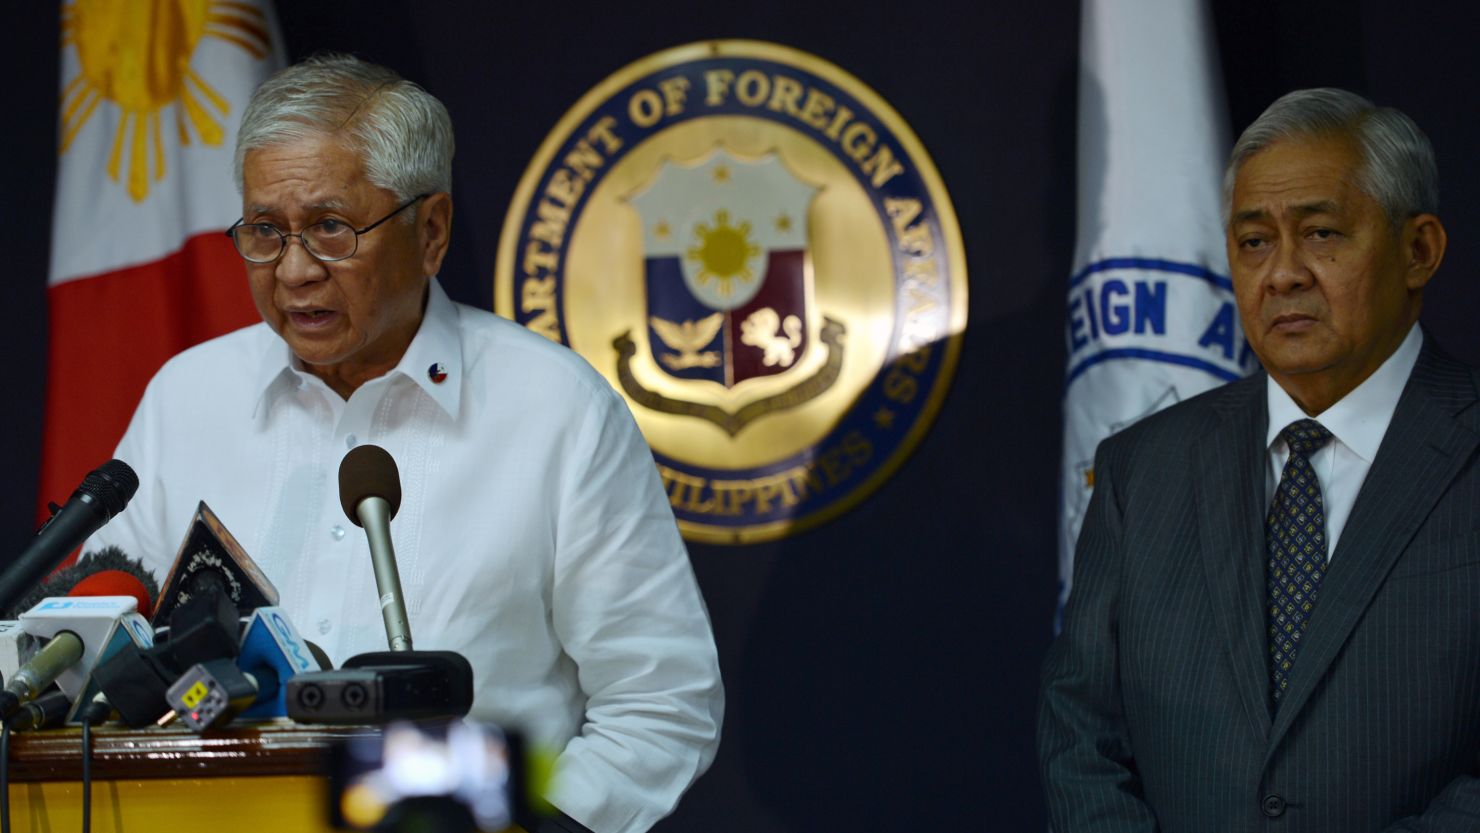 Philippine Foreign secretary Albert del Rosario (L) and solicitor general Francis Jardeleza are pictured in Manila on Tuesday.